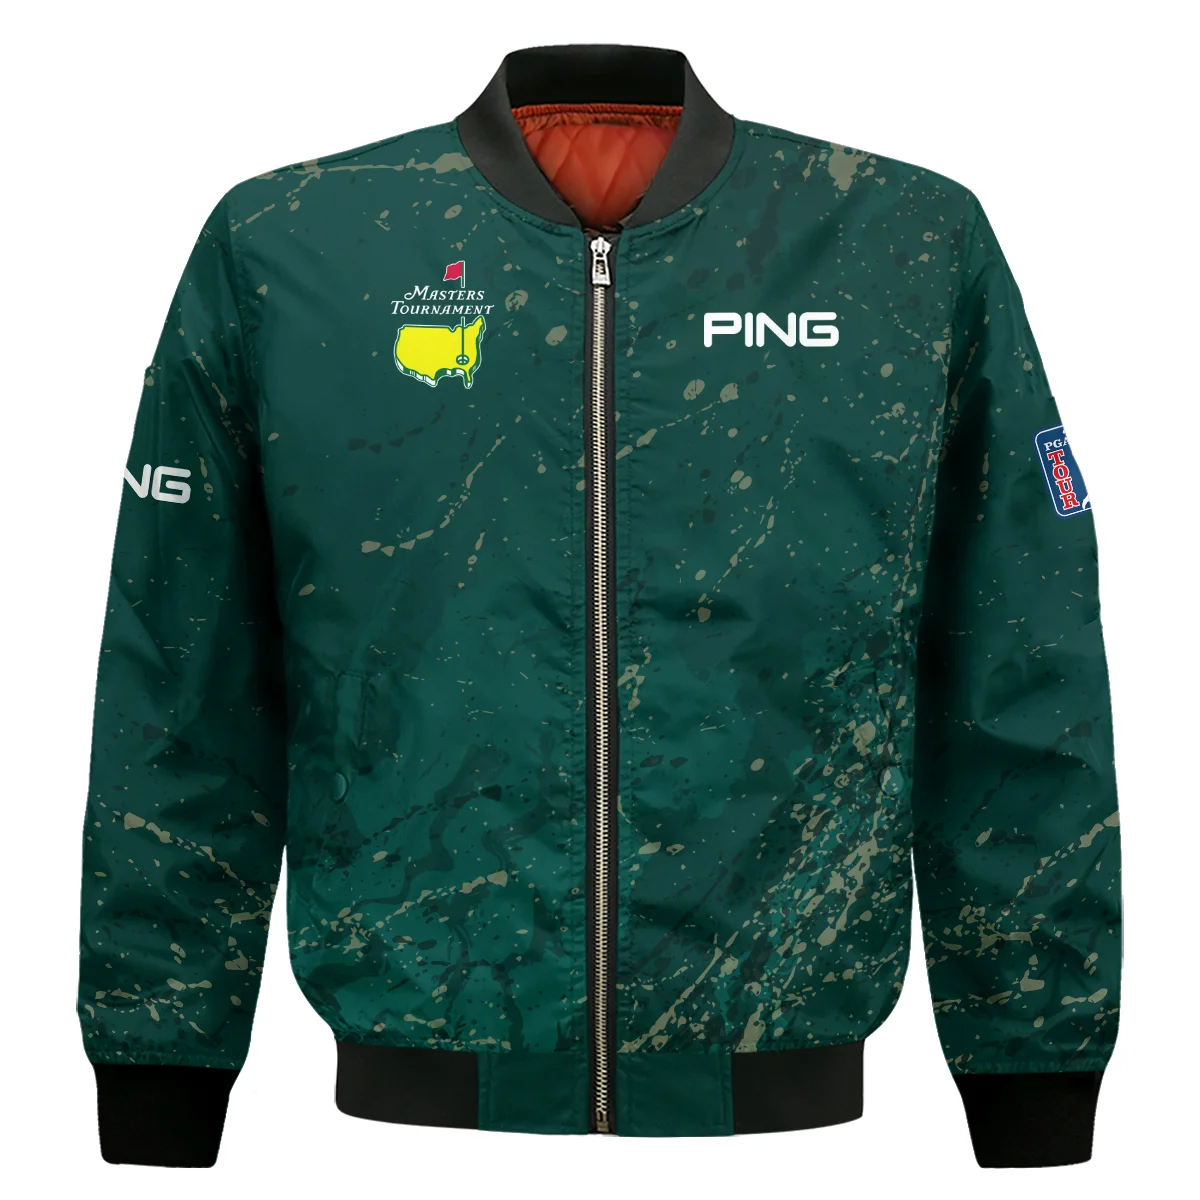 Old Cracked Texture With Gold Splash Paint Masters Tournament Ping Bomber Jacket Style Classic Bomber Jacket